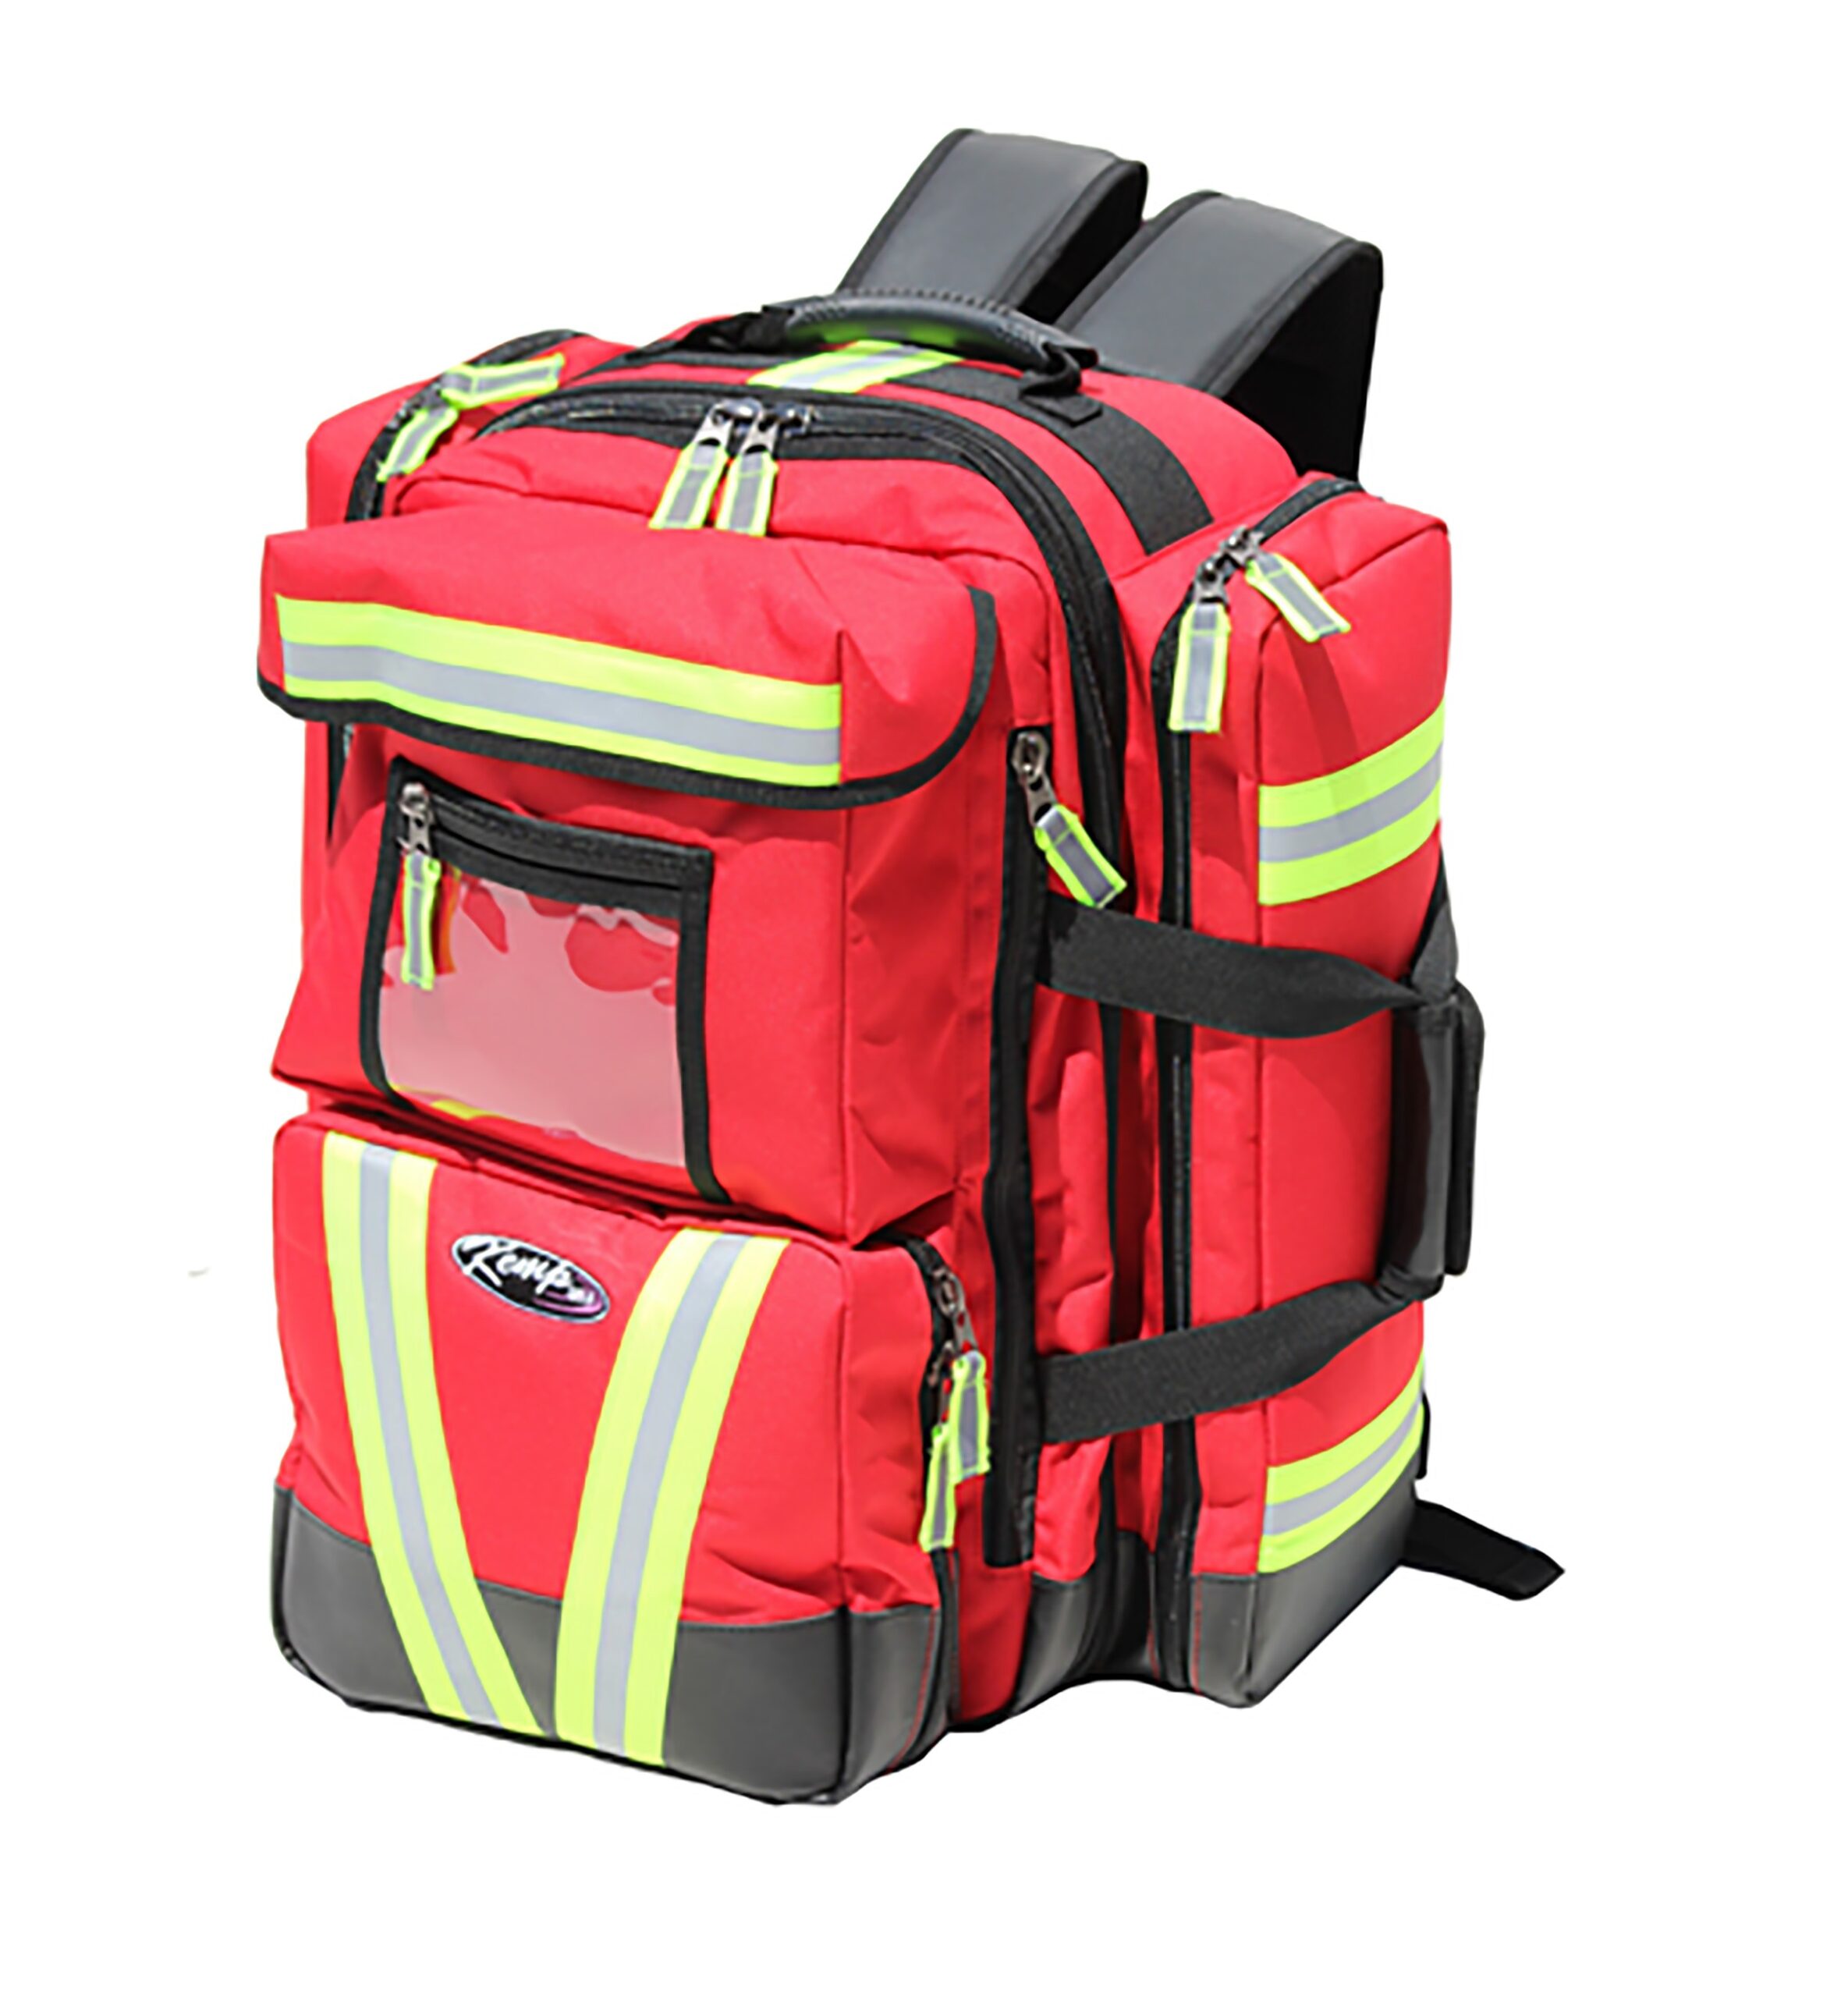 Ultimate EMS Backpack - Defense Equipment Company